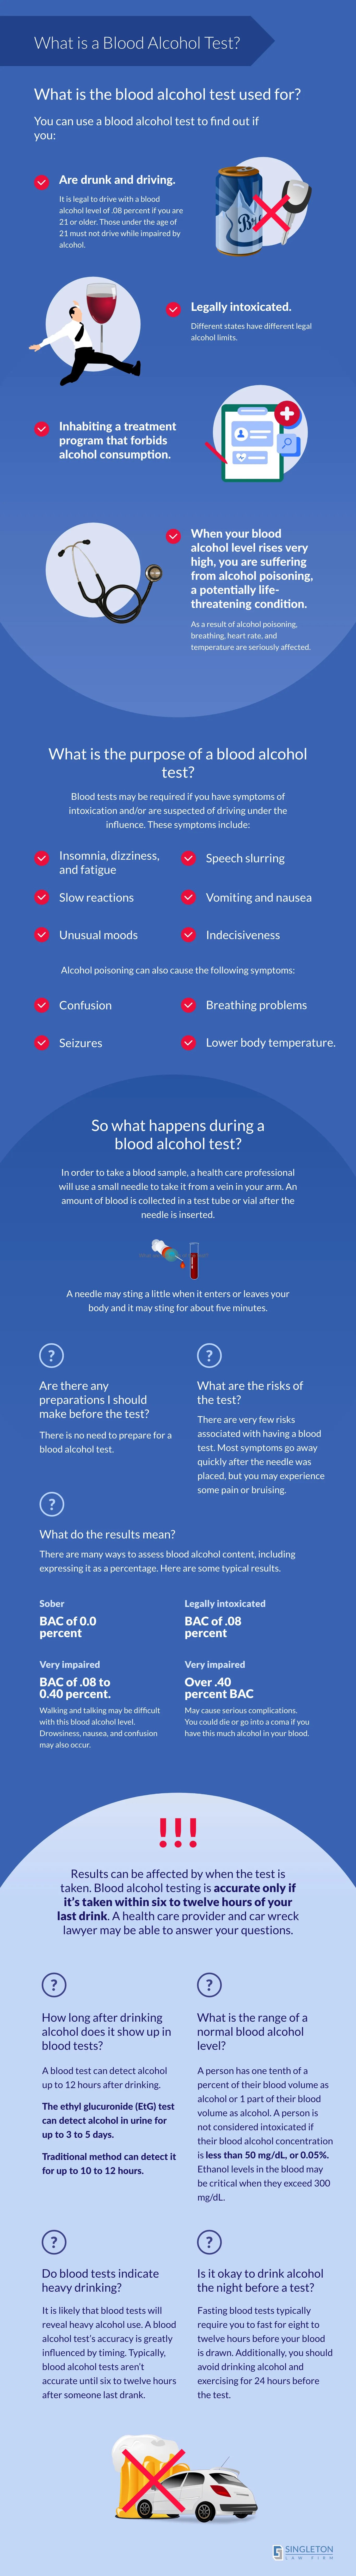 What is a blood alcohol test - Infographic